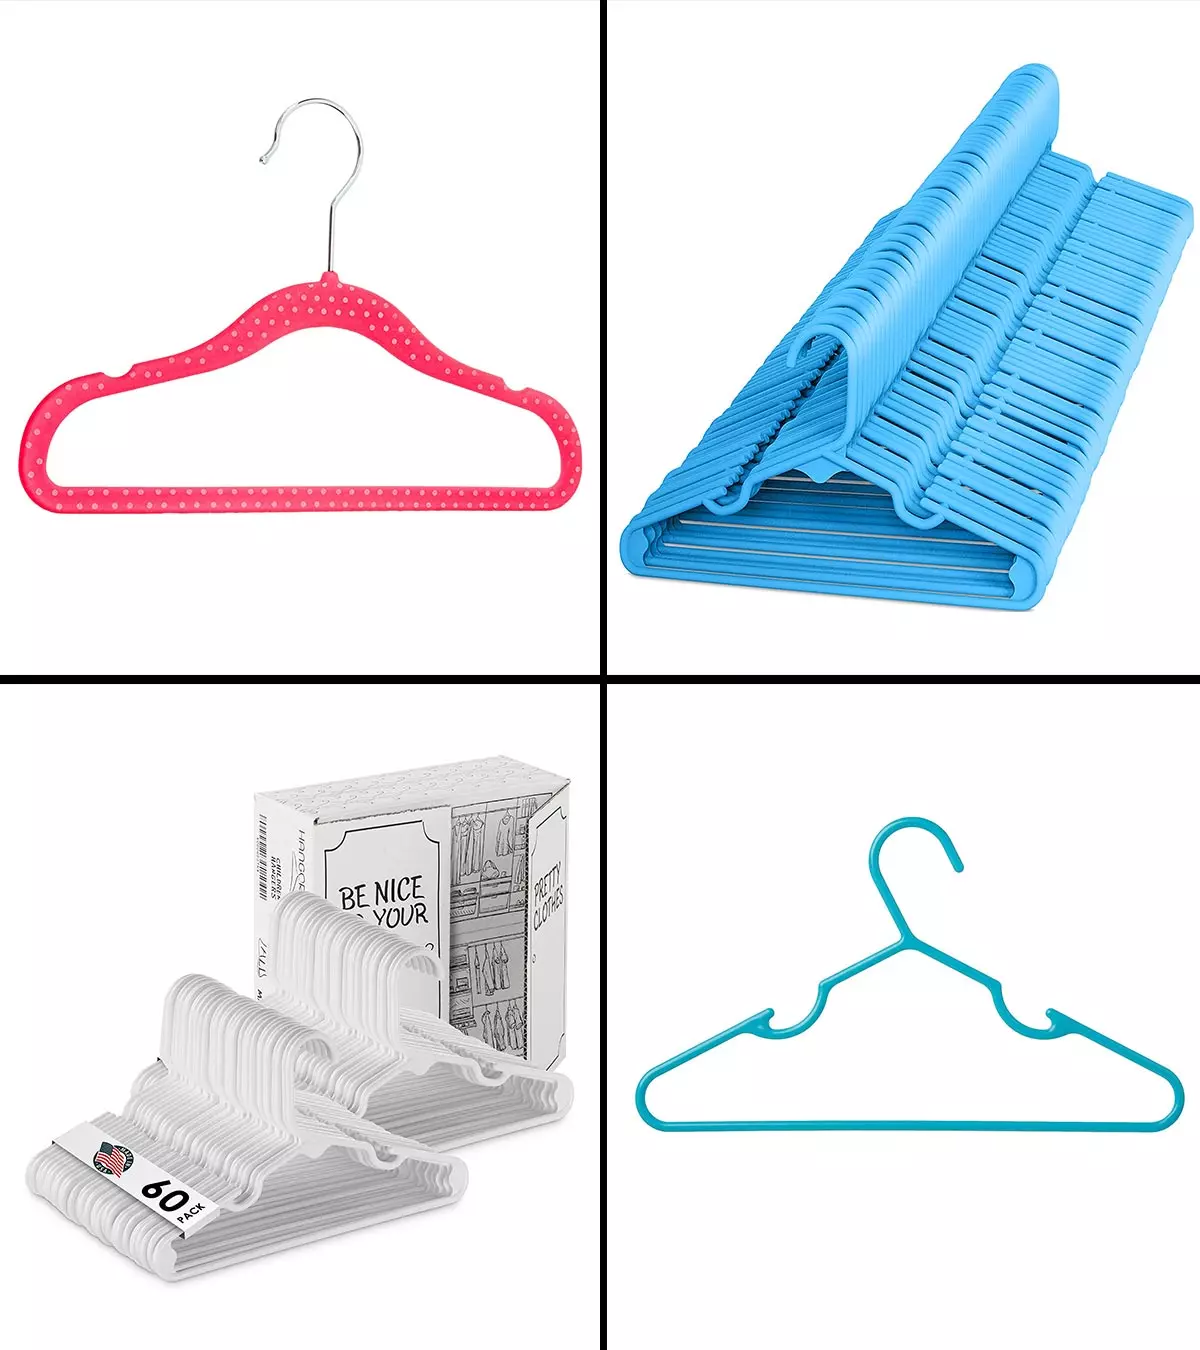 These baby clothes hangers are perfect for maximizing closet space.